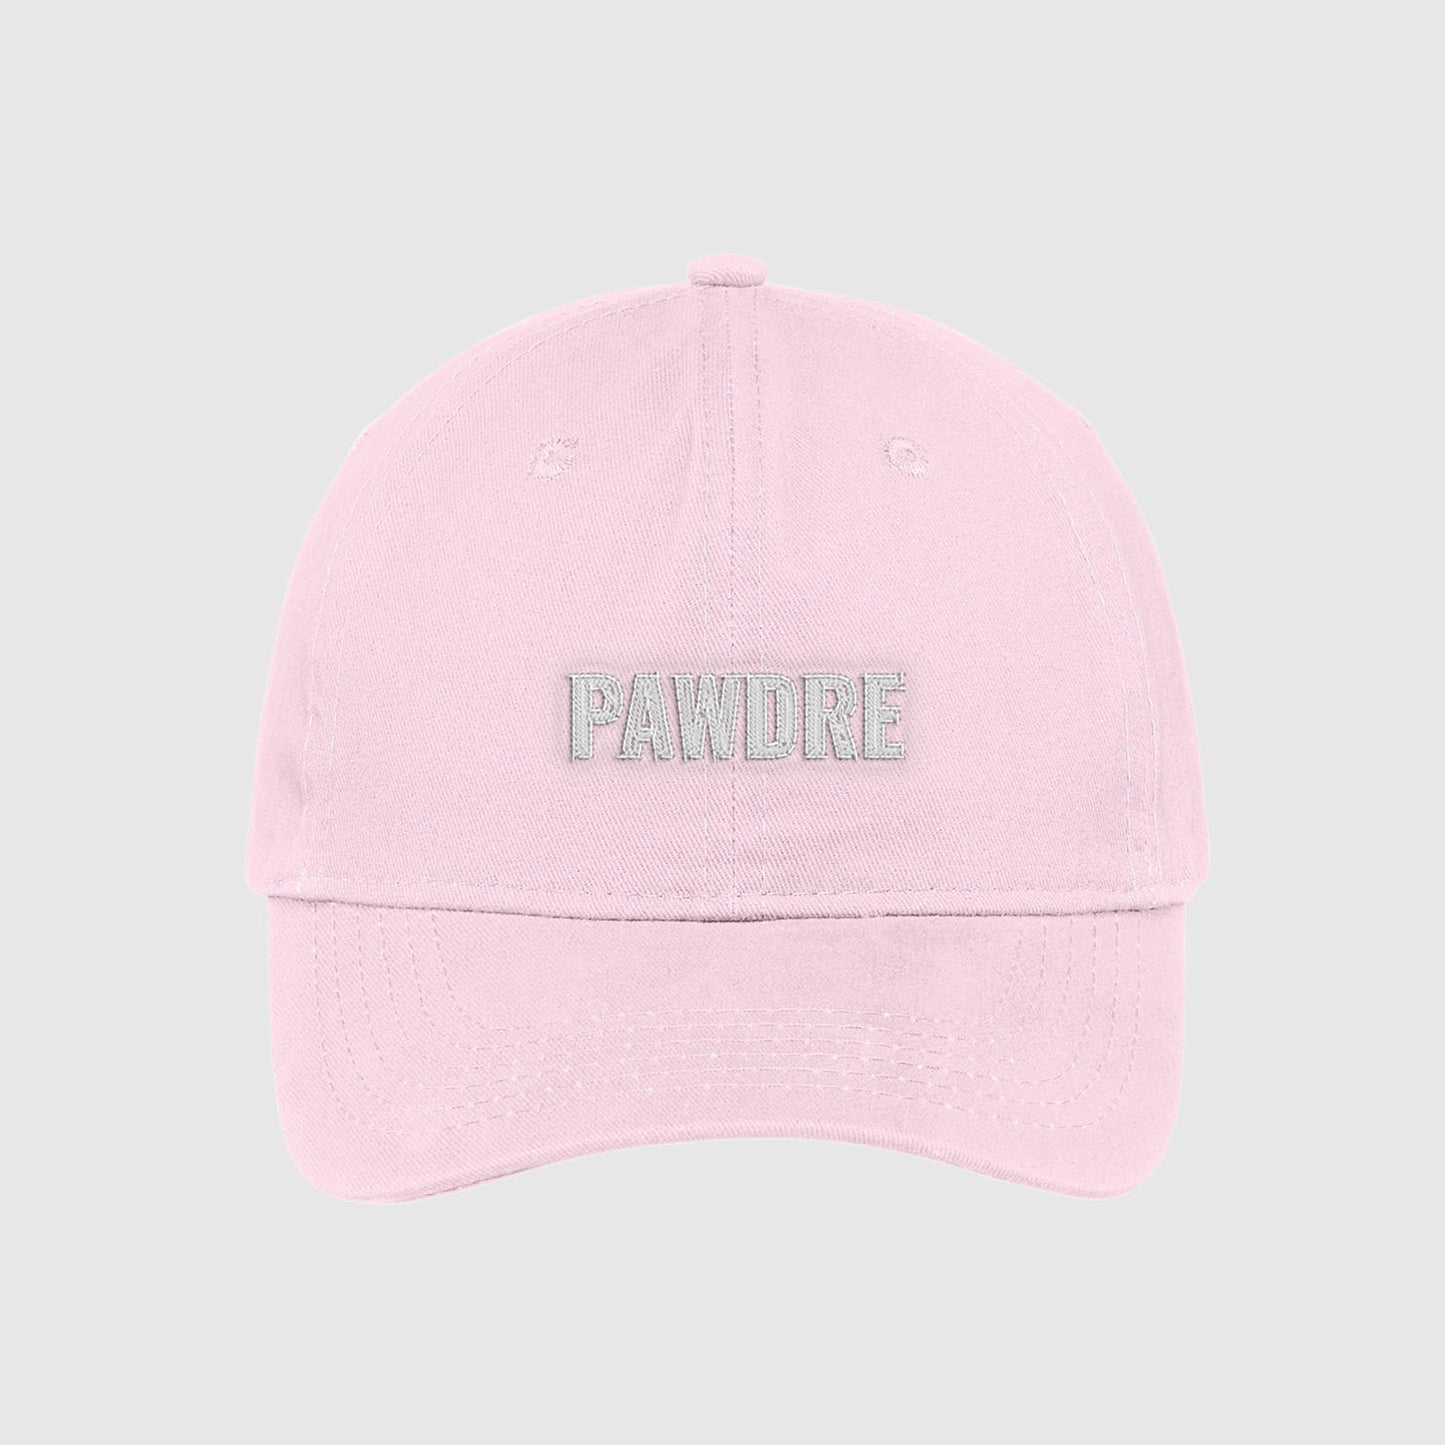 Blush pink Pawdre Hat embroidered with white text.